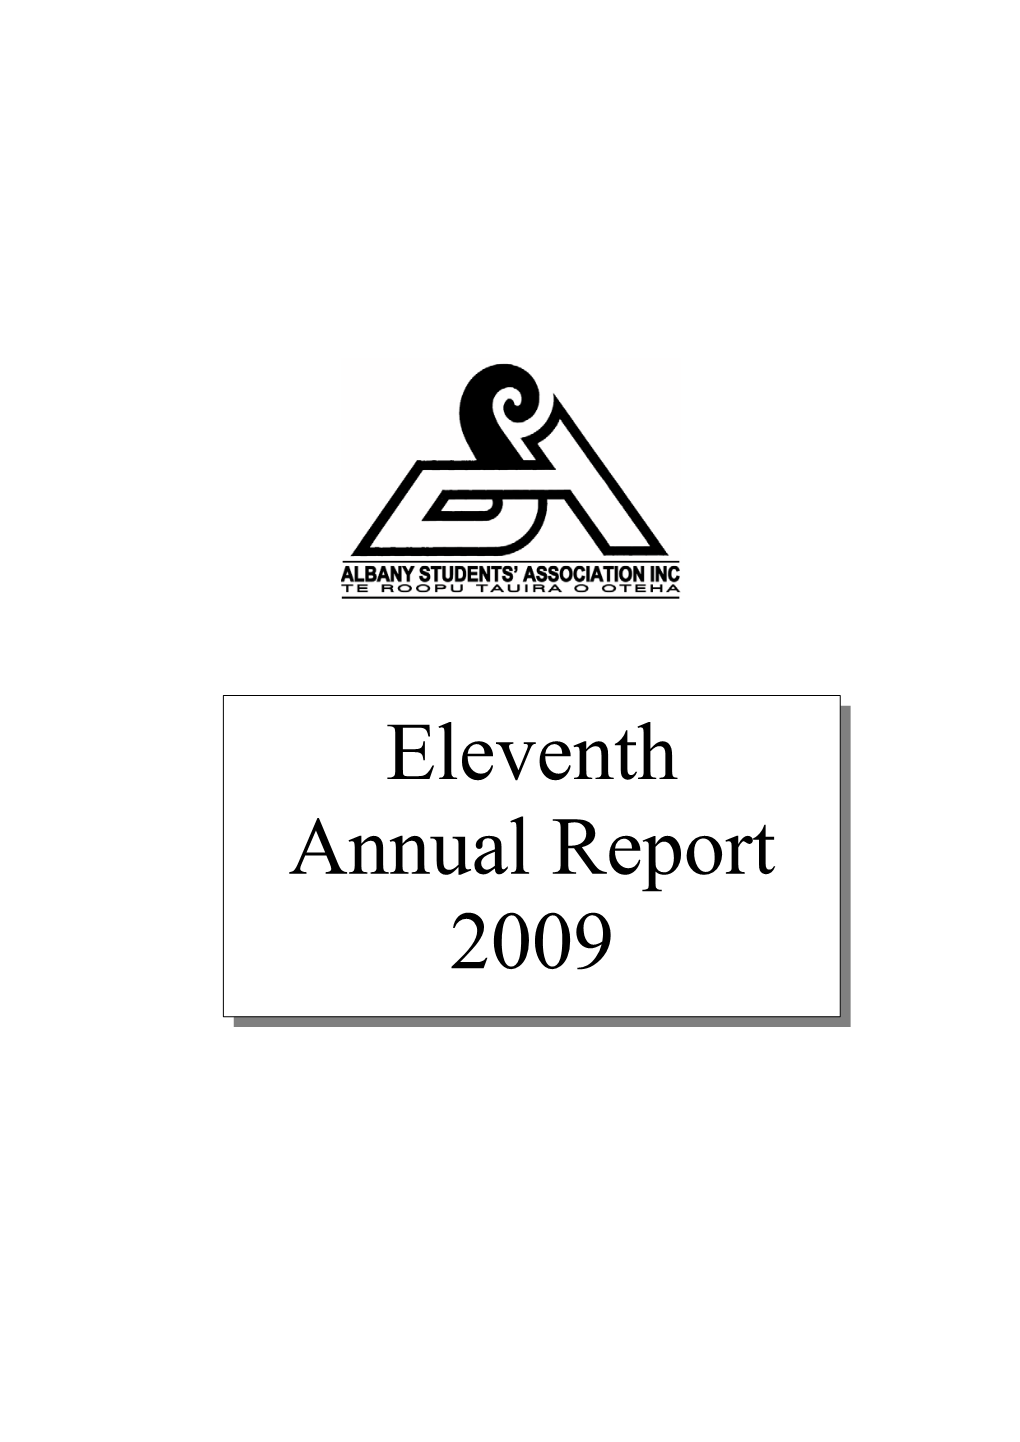 2009 2 Eleventh Annual Report and Financial Statement for the Year Ended 31 December 2009